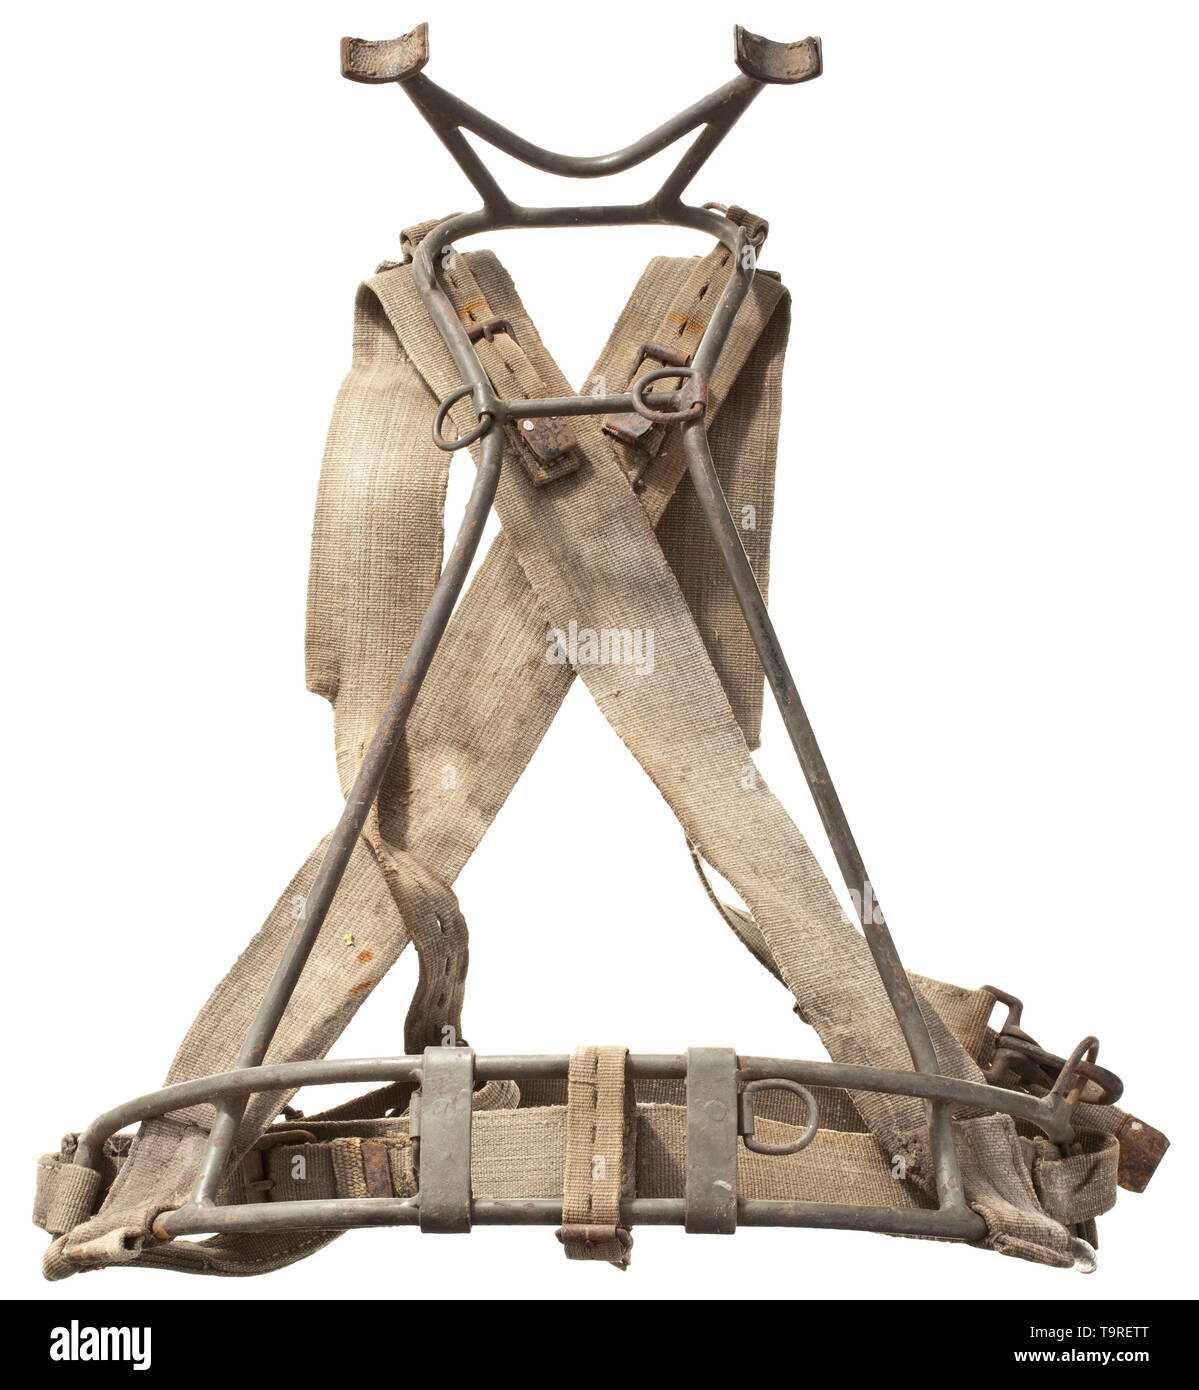 A carry frame for the tube of the 8 cm Mortar 34 manufactured by Miele and Co Bielefeld, 1943 Field-grey painted iron tube frame with integral attachment rings and spacers, stamped 'aqk 1943'and with army acceptance mark. Stitched olive-coloured belting with black painted iron buckles and fittings, stamped '..k 1944' with army eagle- and acceptance marks. historic, historical, 20th century, Editorial-Use-Only Stock Photo